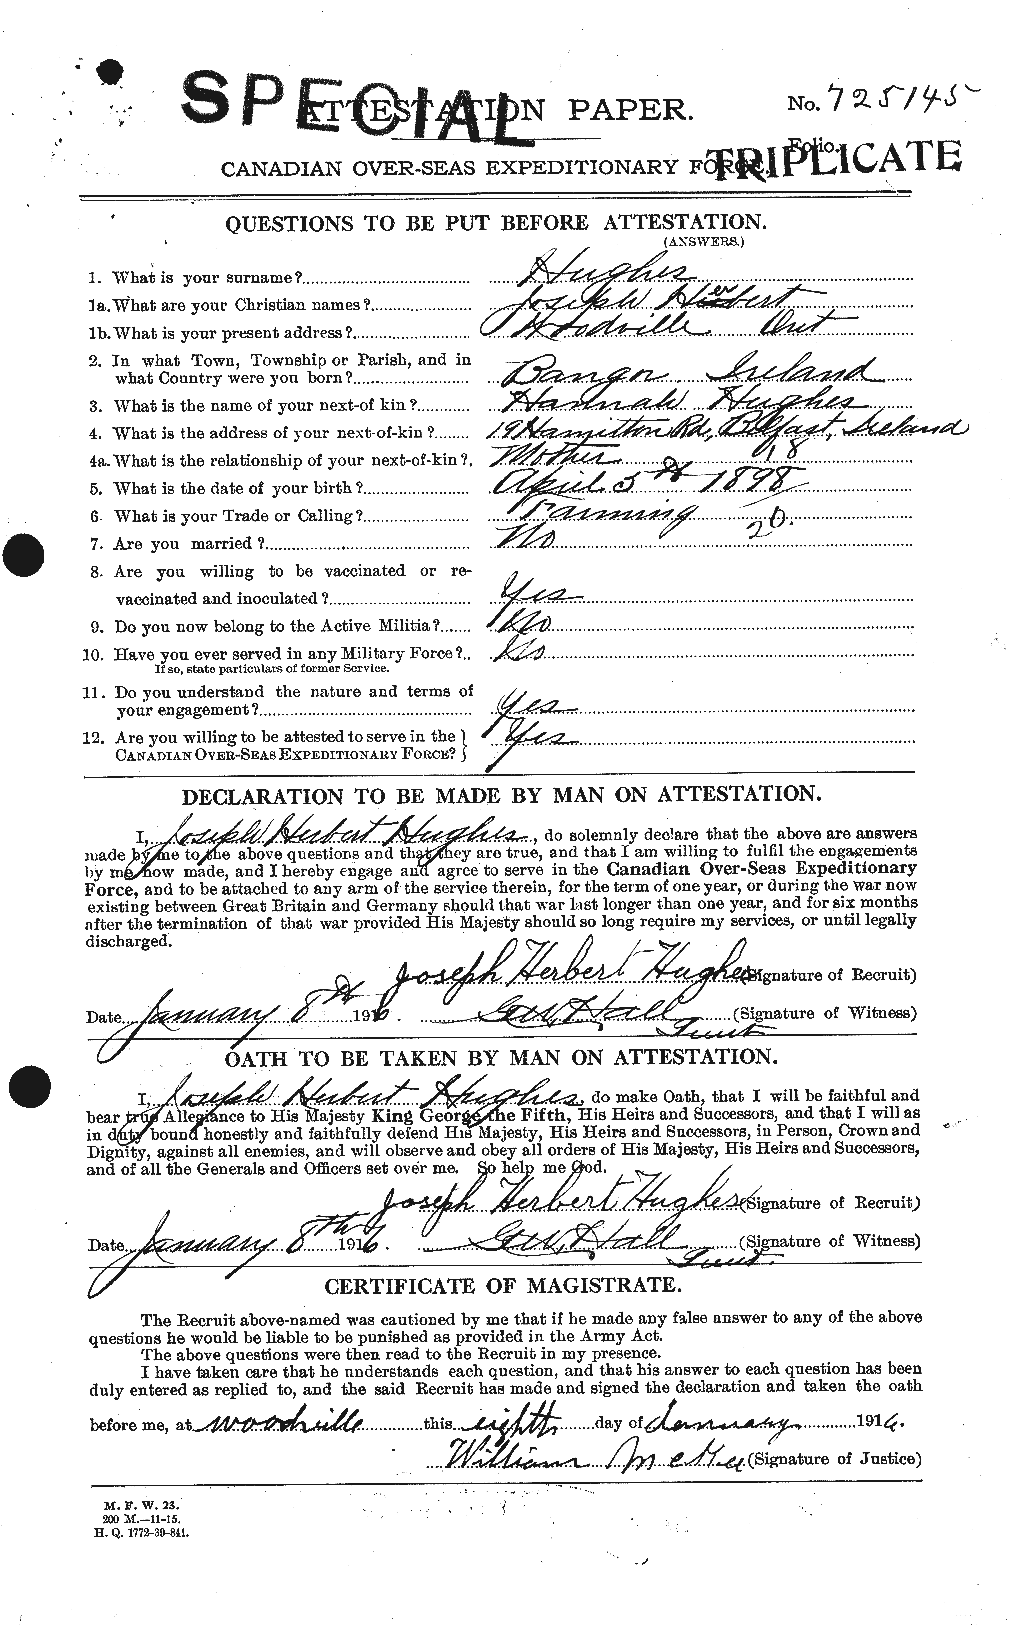 Personnel Records of the First World War - CEF 404082a